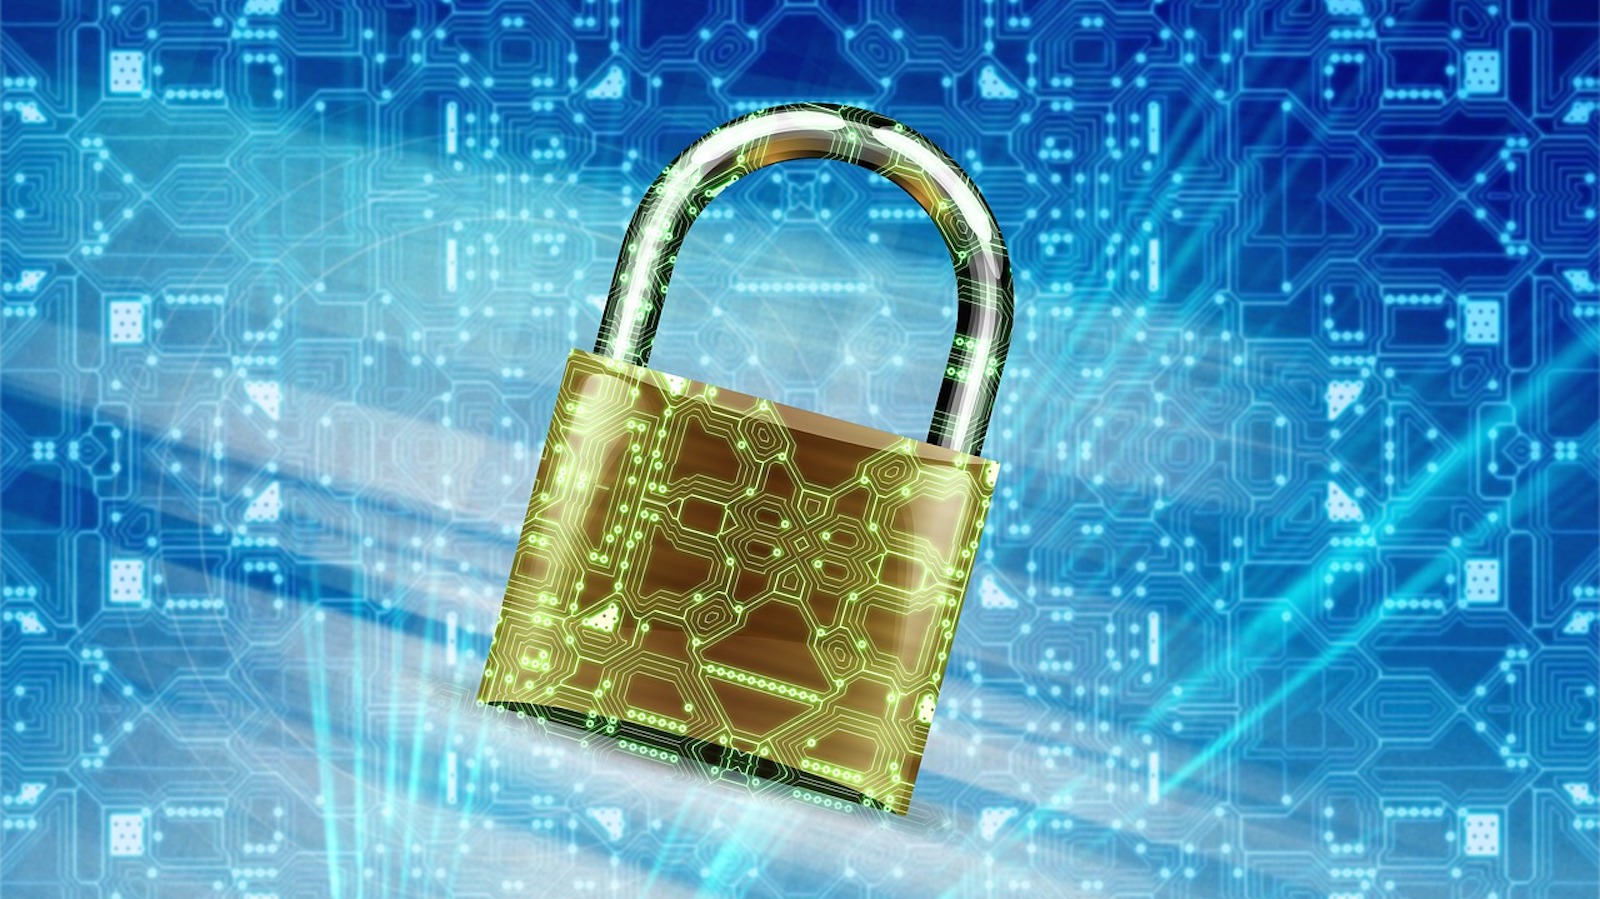 A gold lock atop a blue background with elements of data